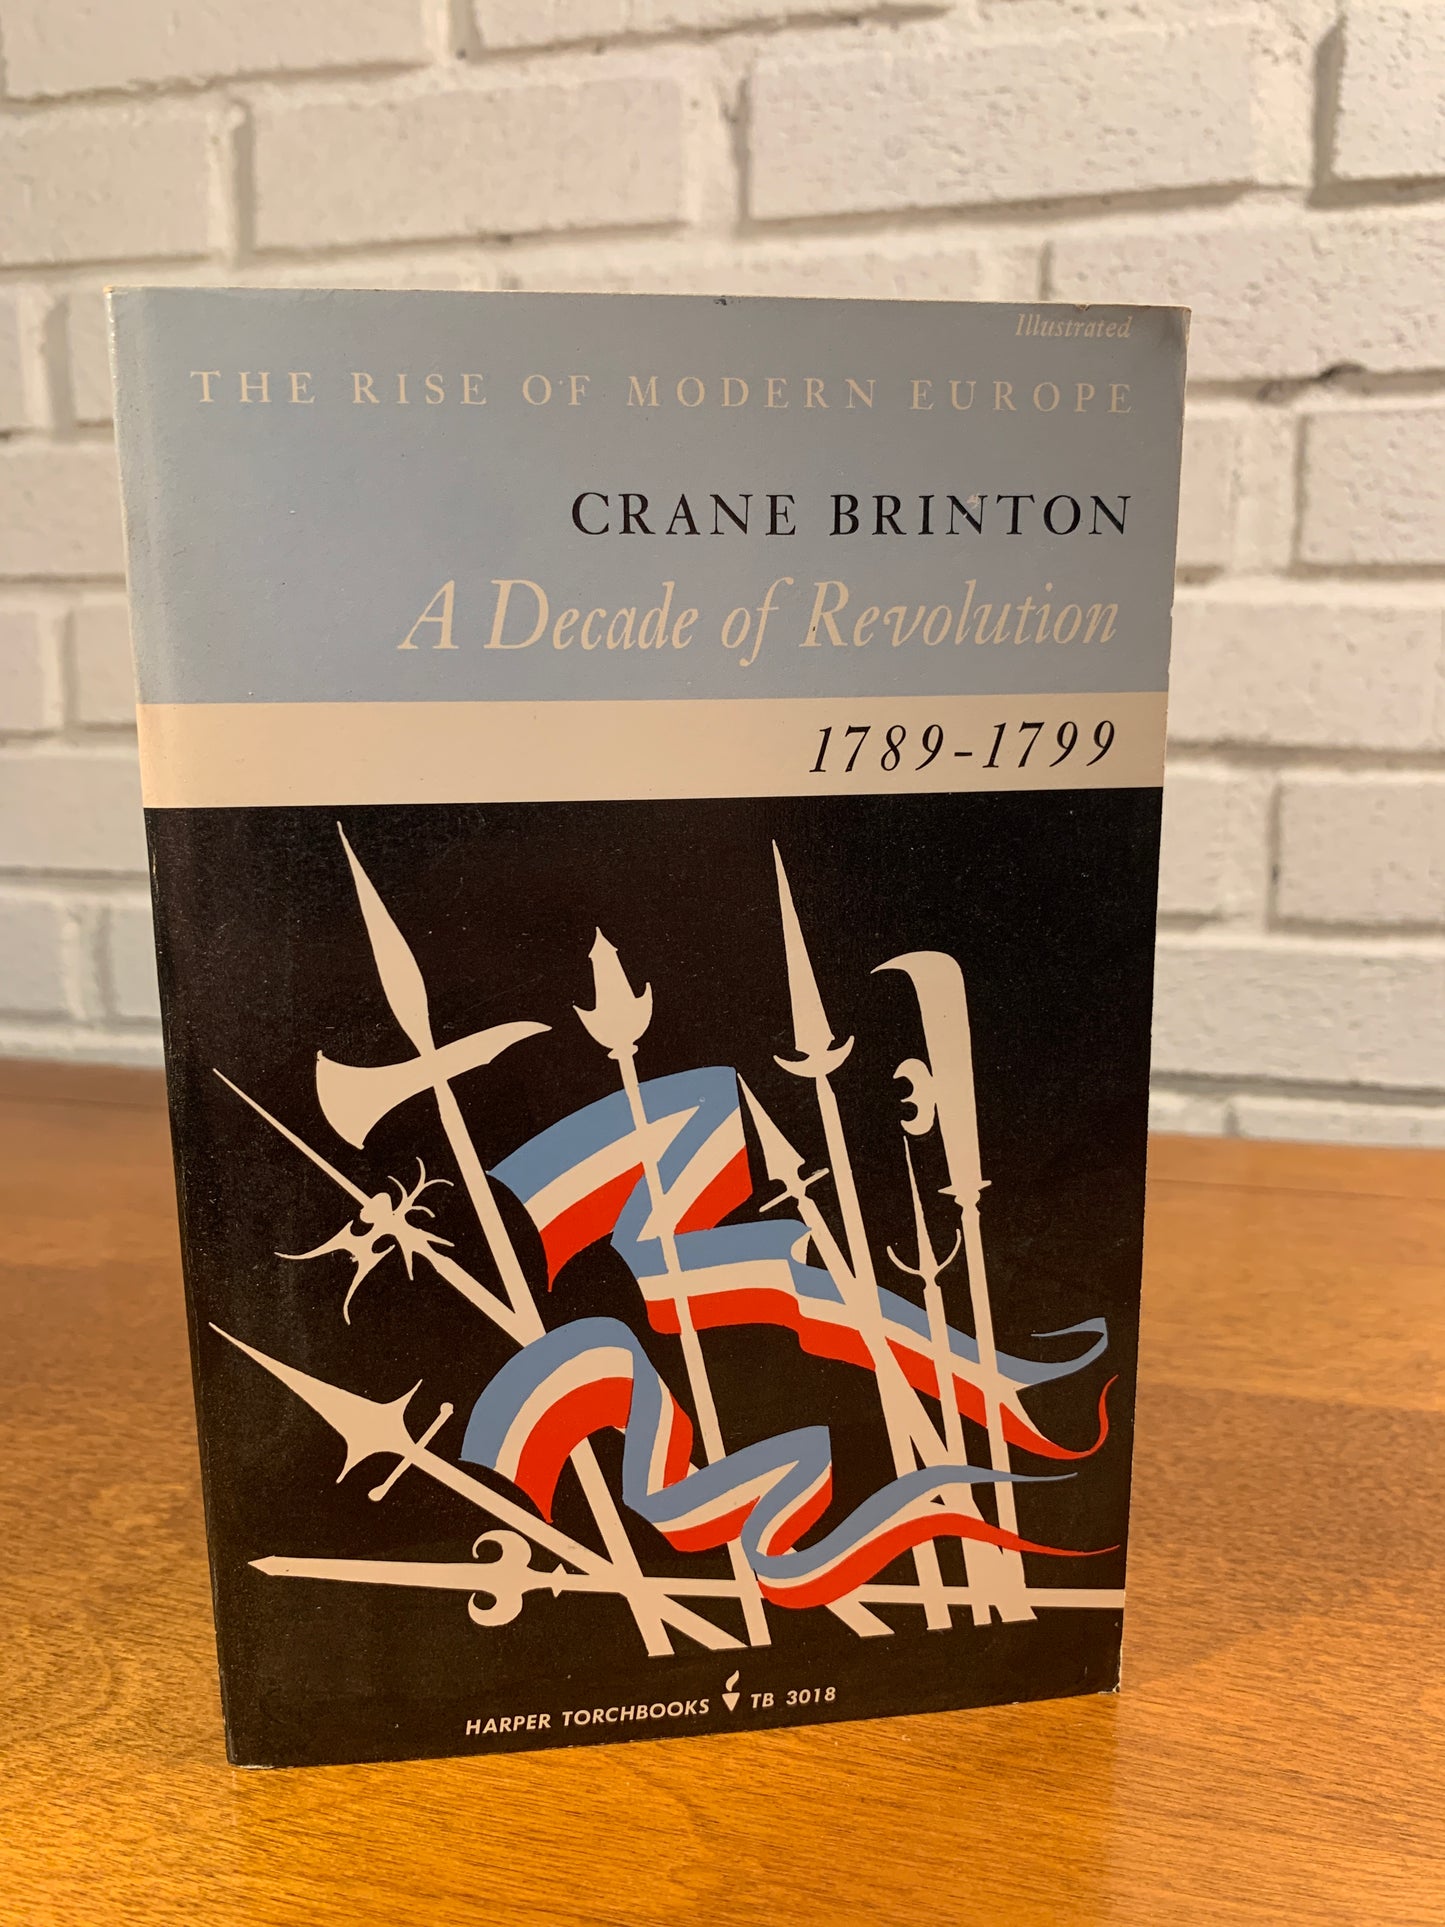 The Rise of Modern Europe, A Decade of Revolution 1789-1799 by Crane Brinton